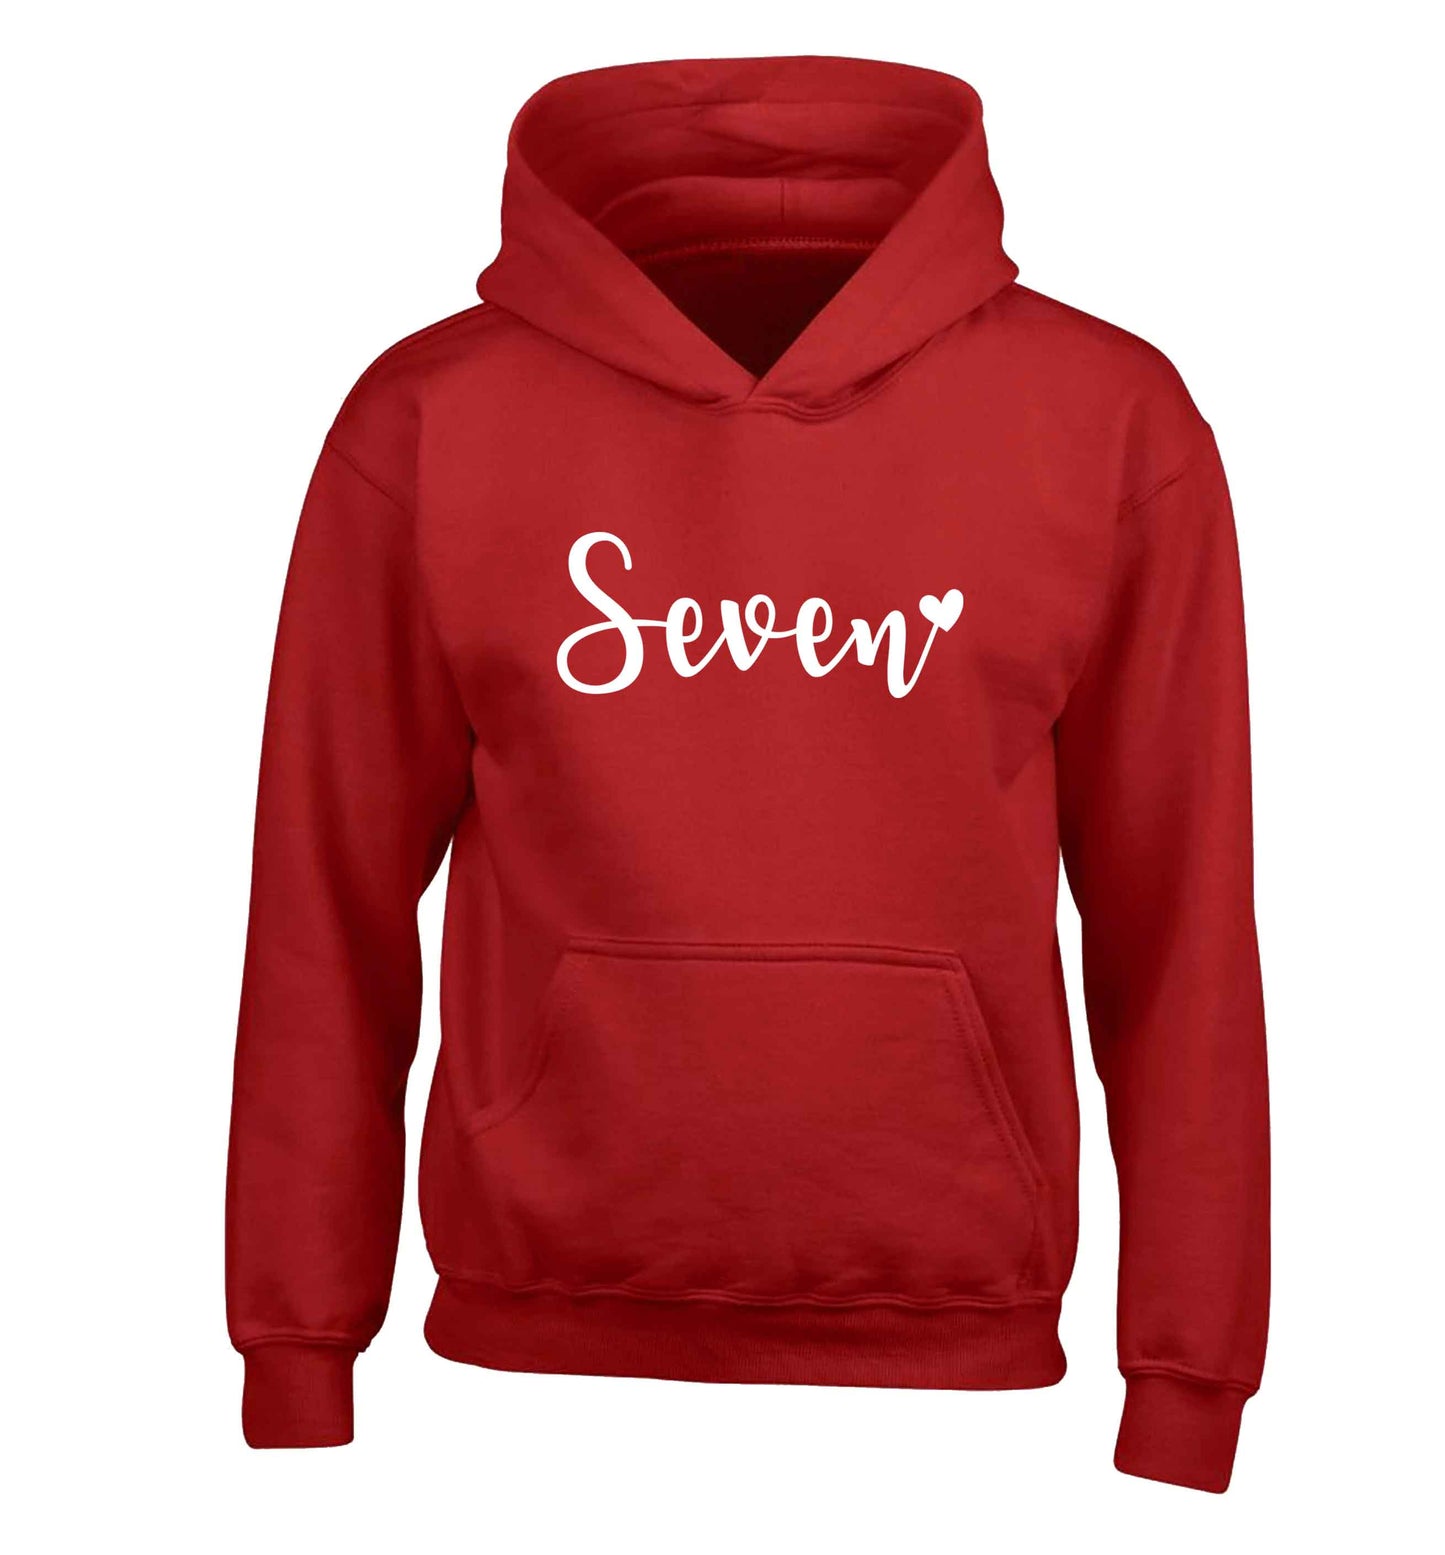 Seven and heart children's red hoodie 12-13 Years